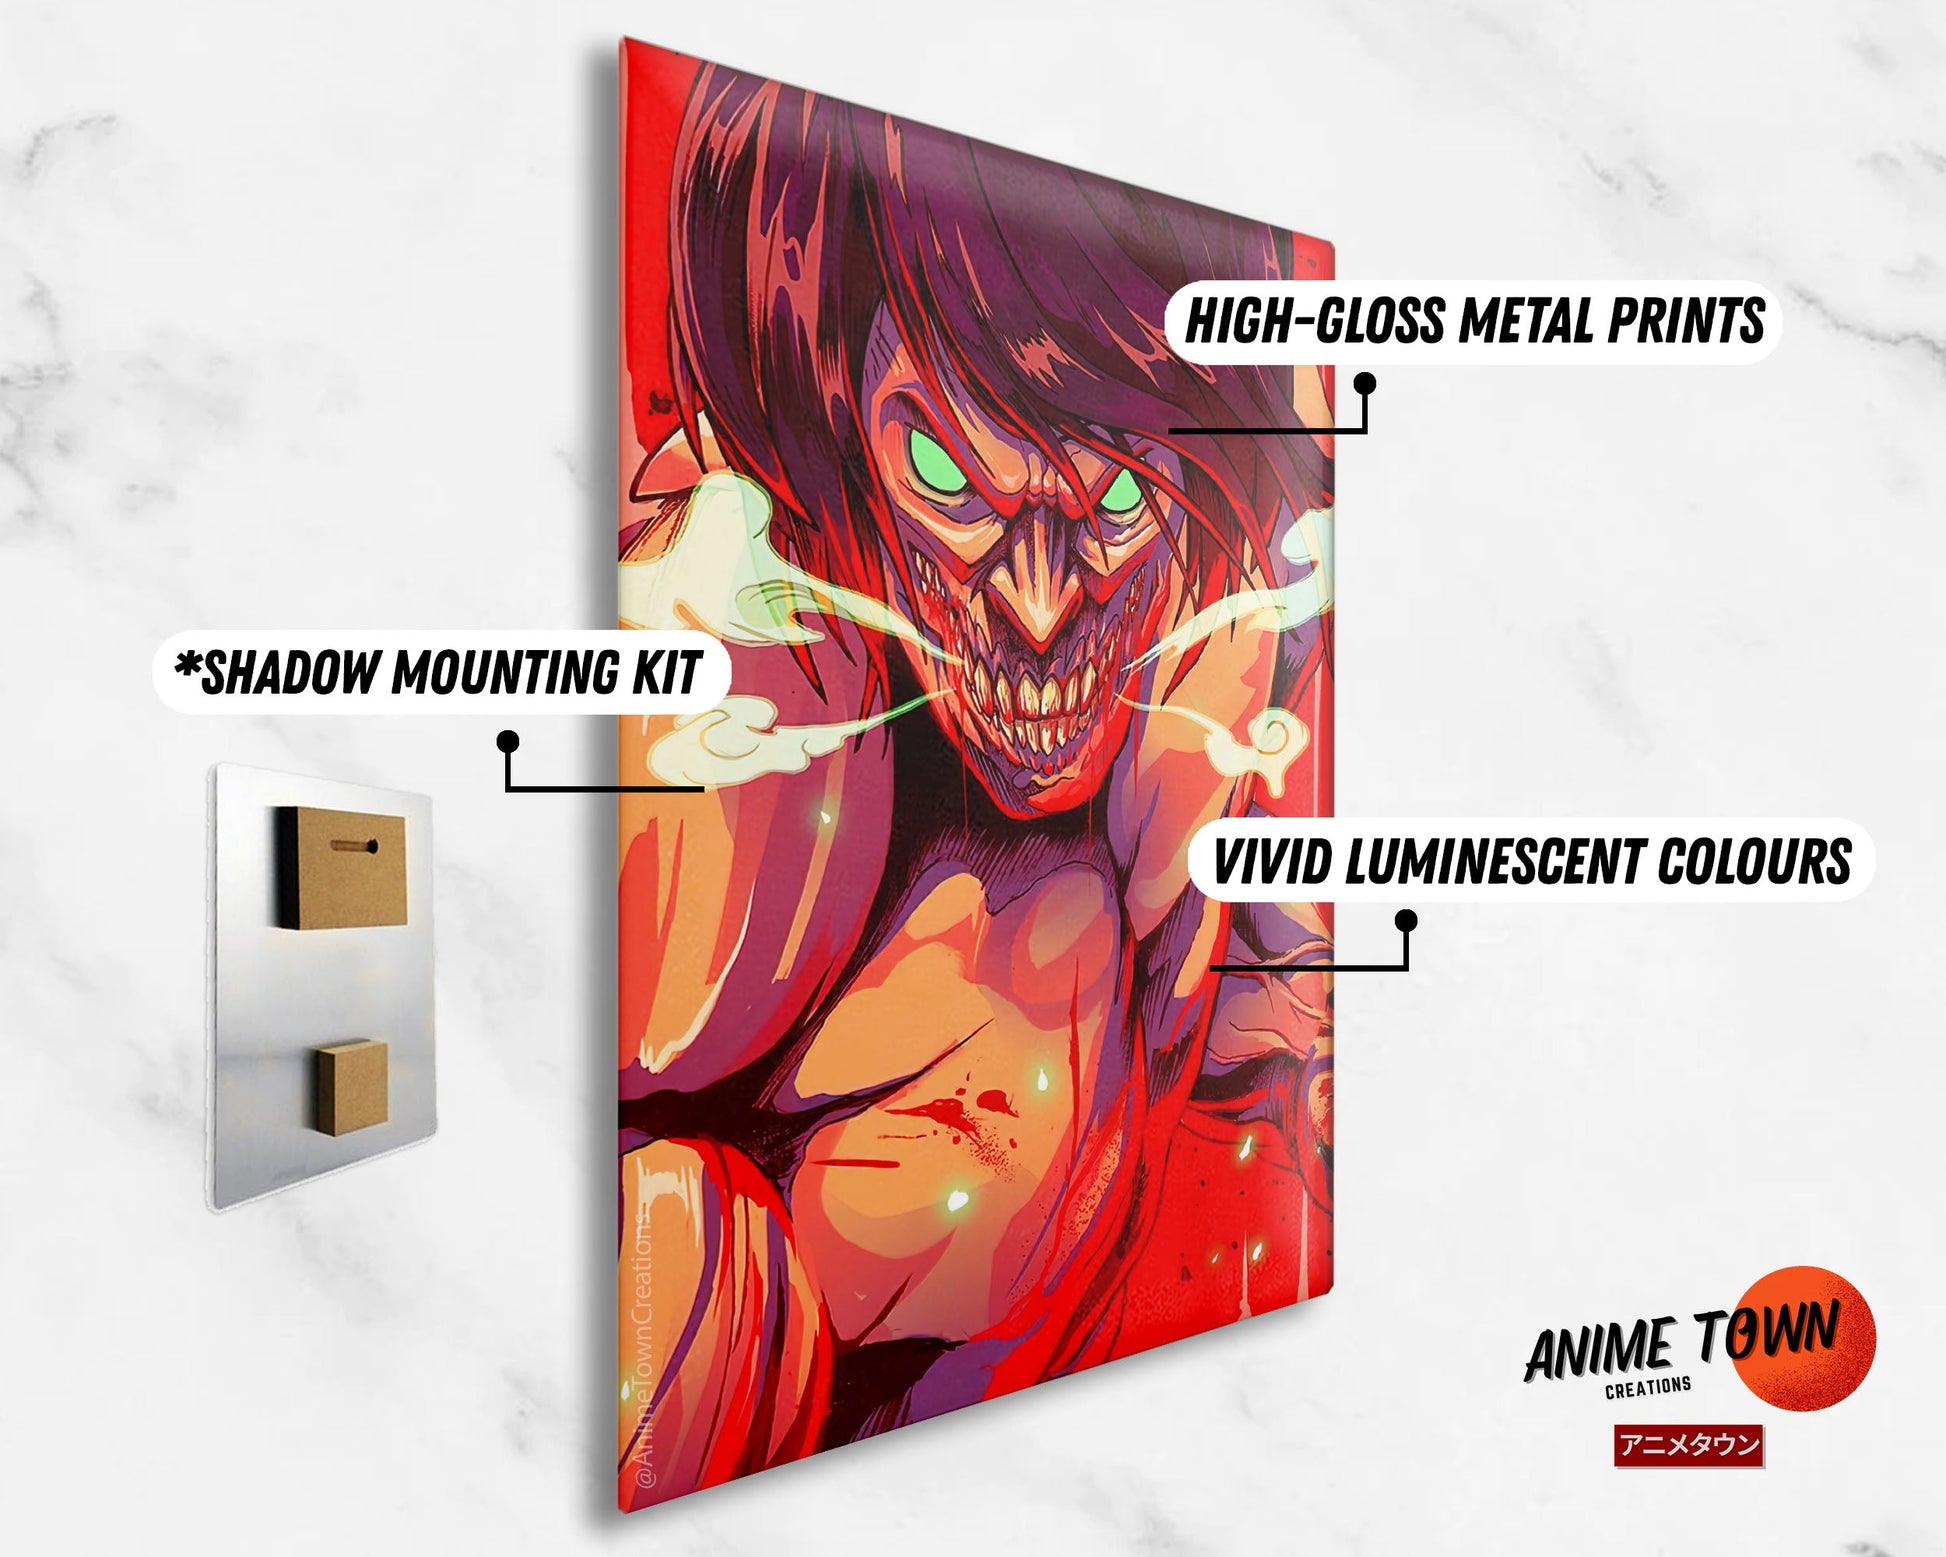 Anime Town Creations Metal Poster Attack on Titan Attack Titan 11" x 17" Home Goods - Anime Attack on Titan Metal Poster